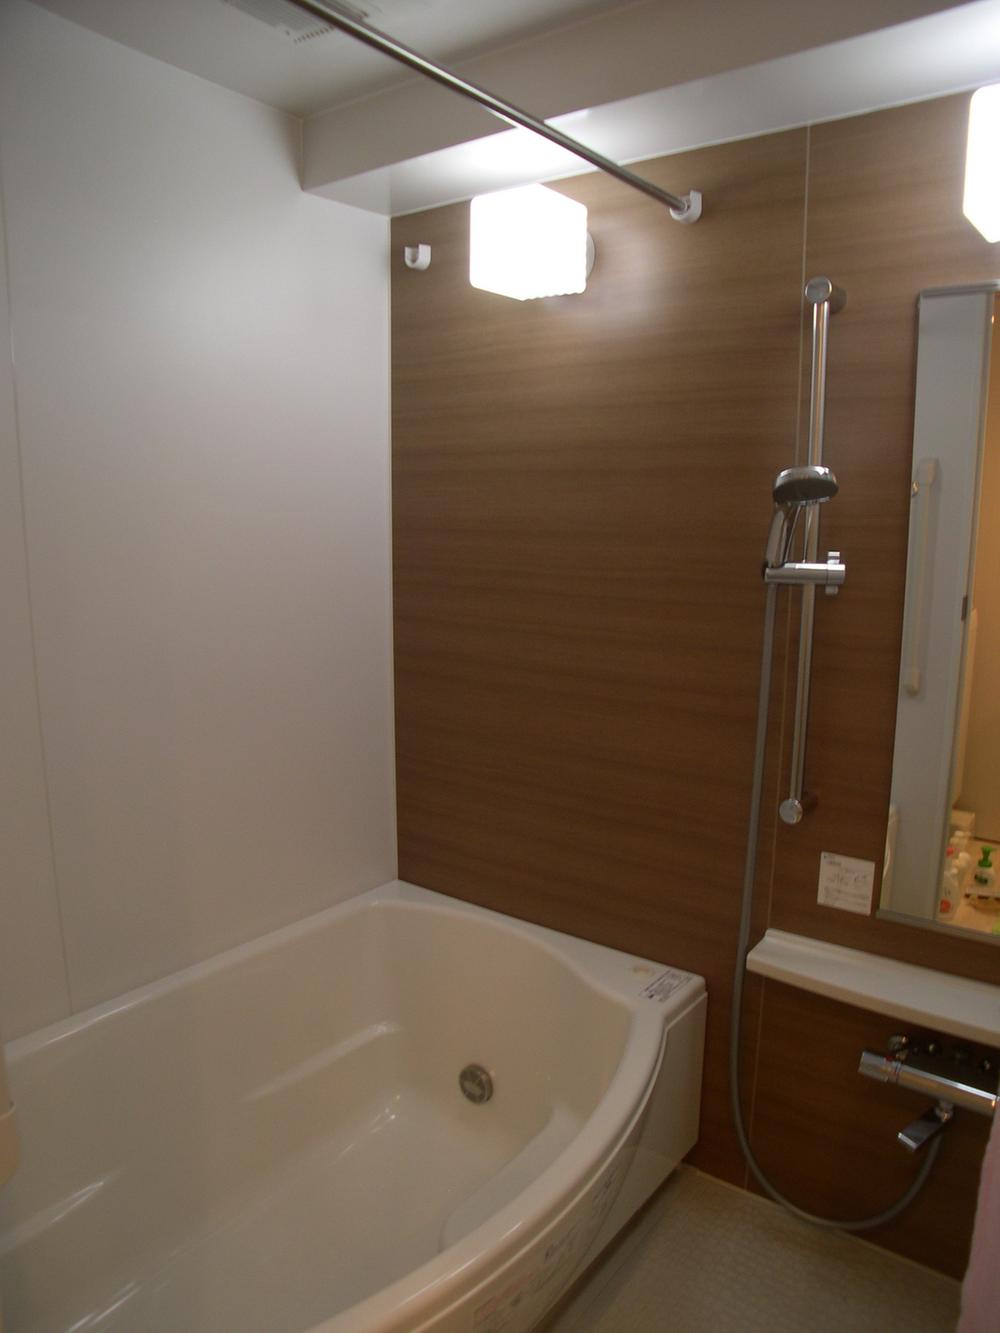 Bathroom. In the bathroom is equipped with a bathroom ventilation drying heater with a mist sauna function. Also, Tub comfortably relax with a bench in the low floor type.